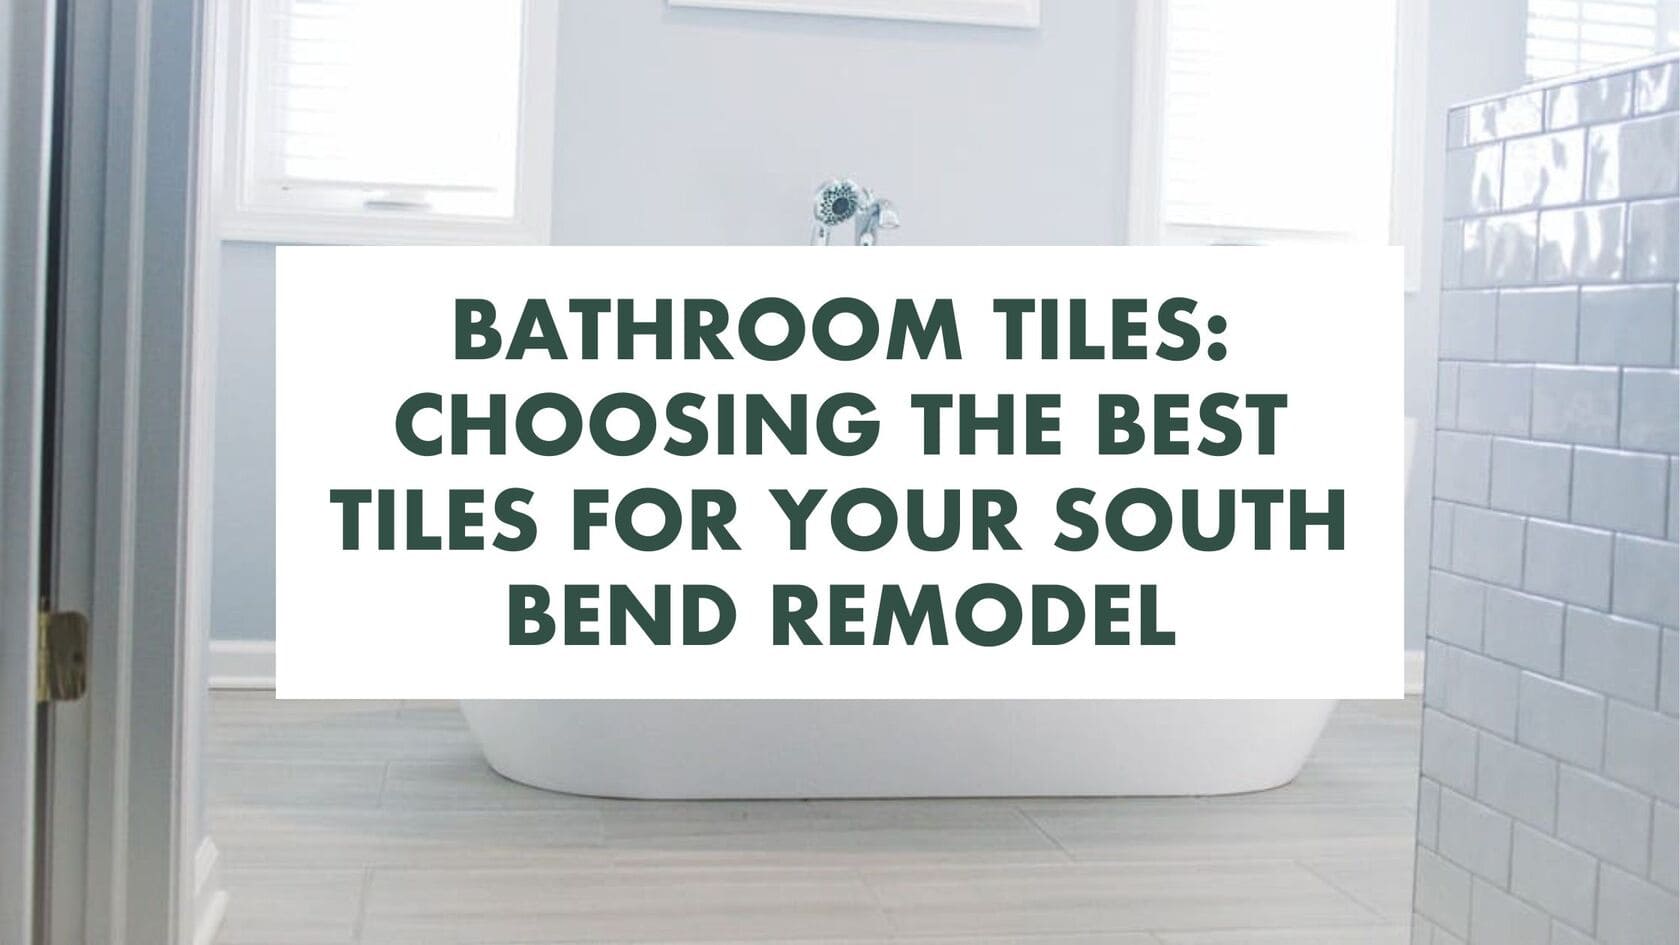 Bathroom Tiles: Choosing the Best Tiles For Your South Bend Remodel